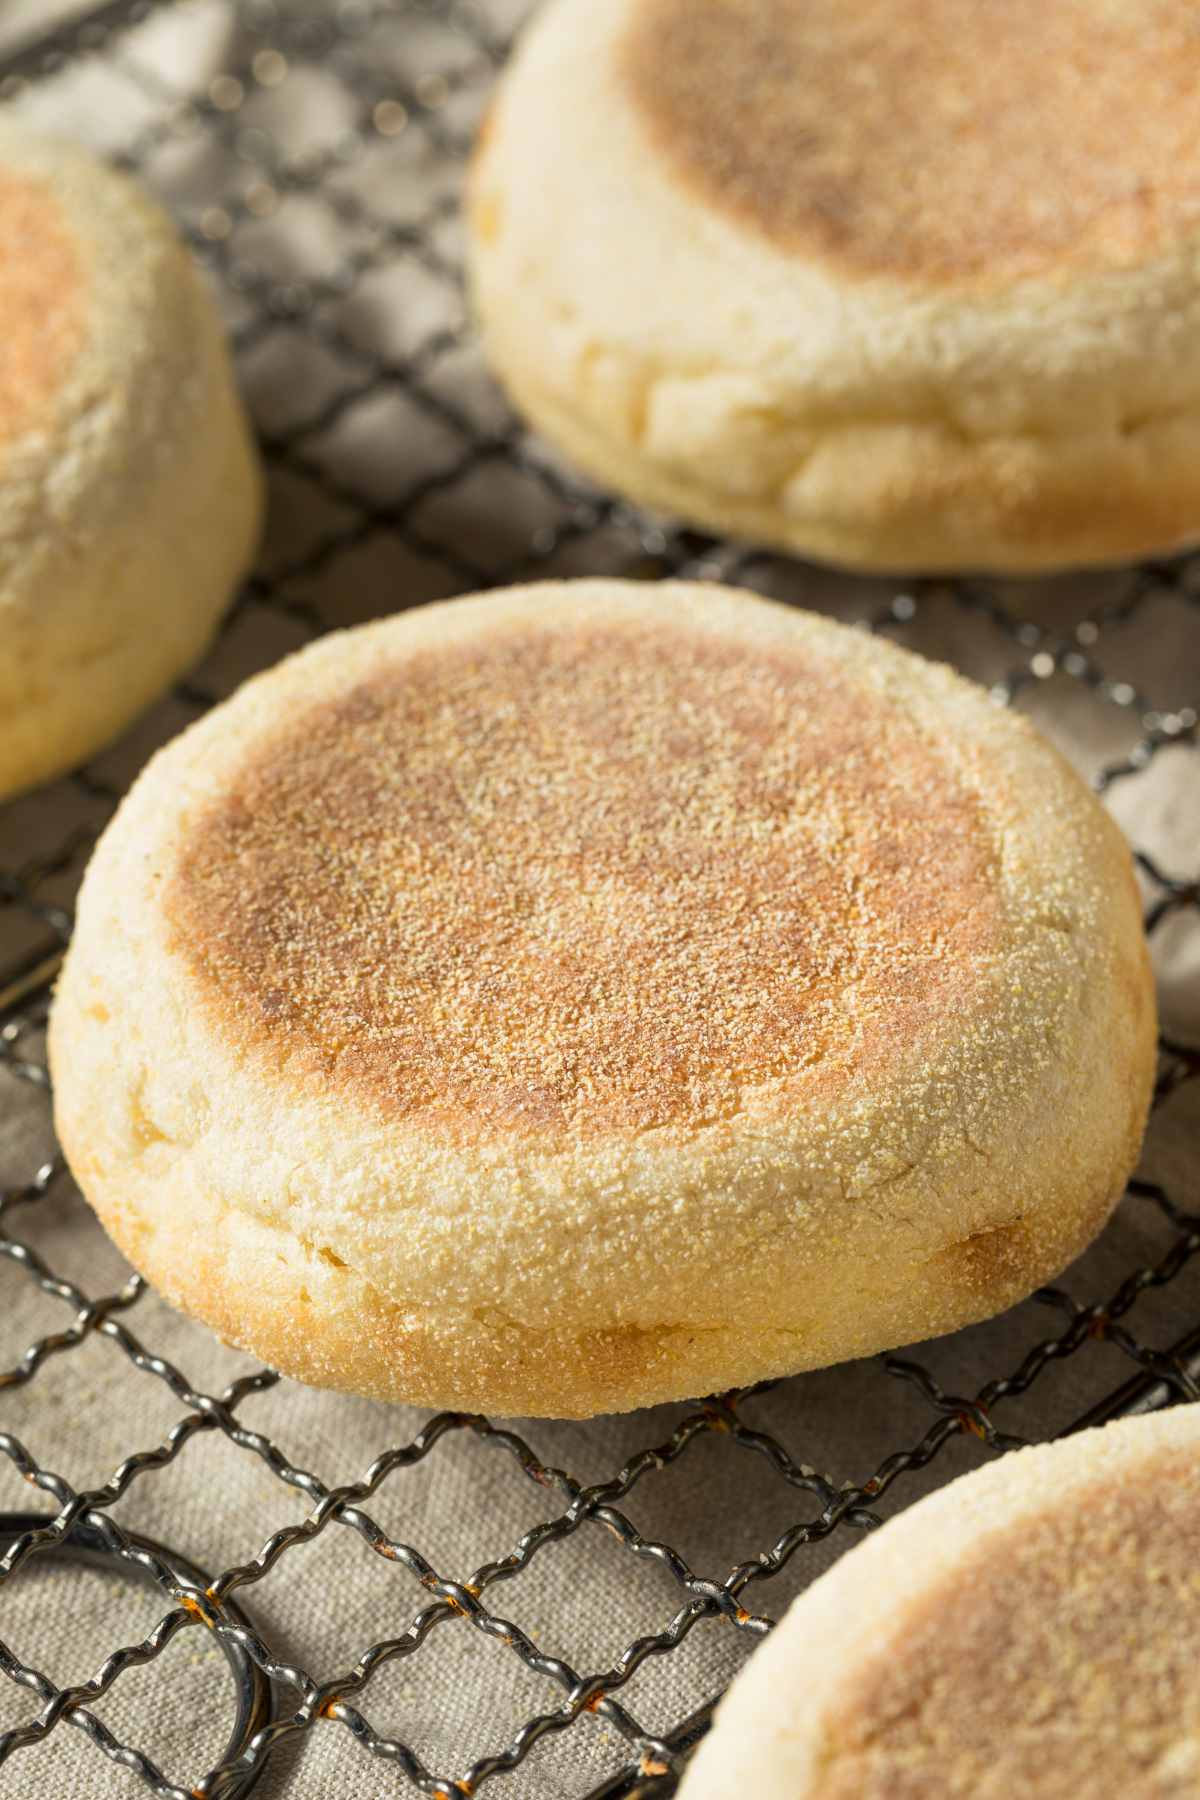 Ever wonder how many carbs are in English muffins? Are they keto-friendly? With the rise of the ketogenic diet, you may want to know whether English muffins can fit into a low-carb, high-fat lifestyle. In this article, we'll explore the carb content in English muffins and share with you a keto-friendly recipe to enjoy this breakfast classic.